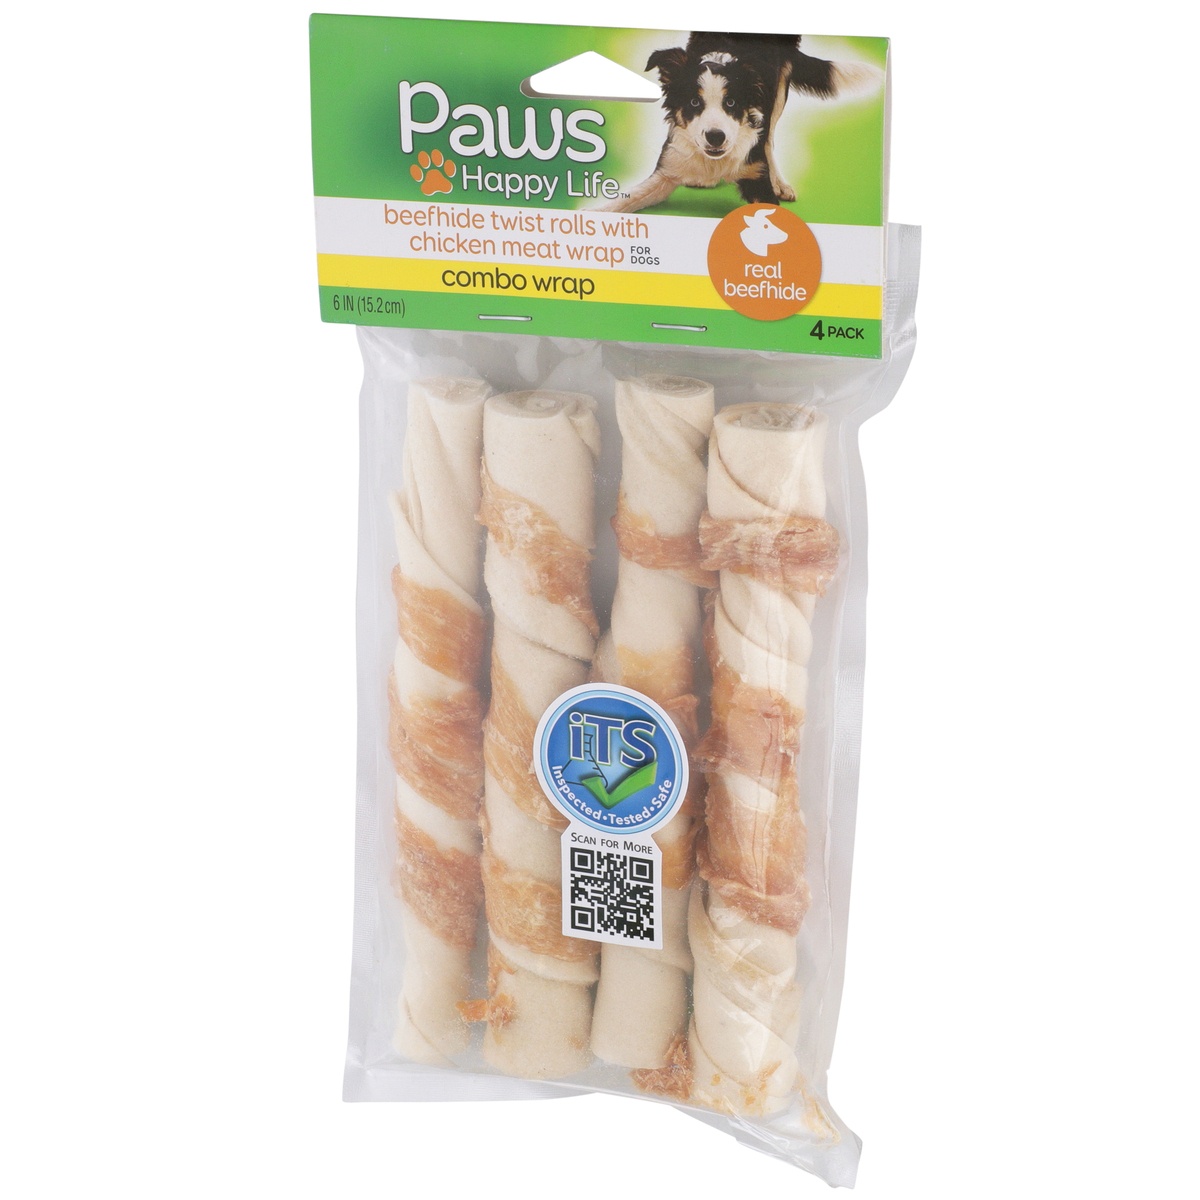 slide 3 of 8, Paws Happy Life Combo Wrap Beefhide Twist Rolls With Chicken Meat Wrap For Dogs, 4 ct